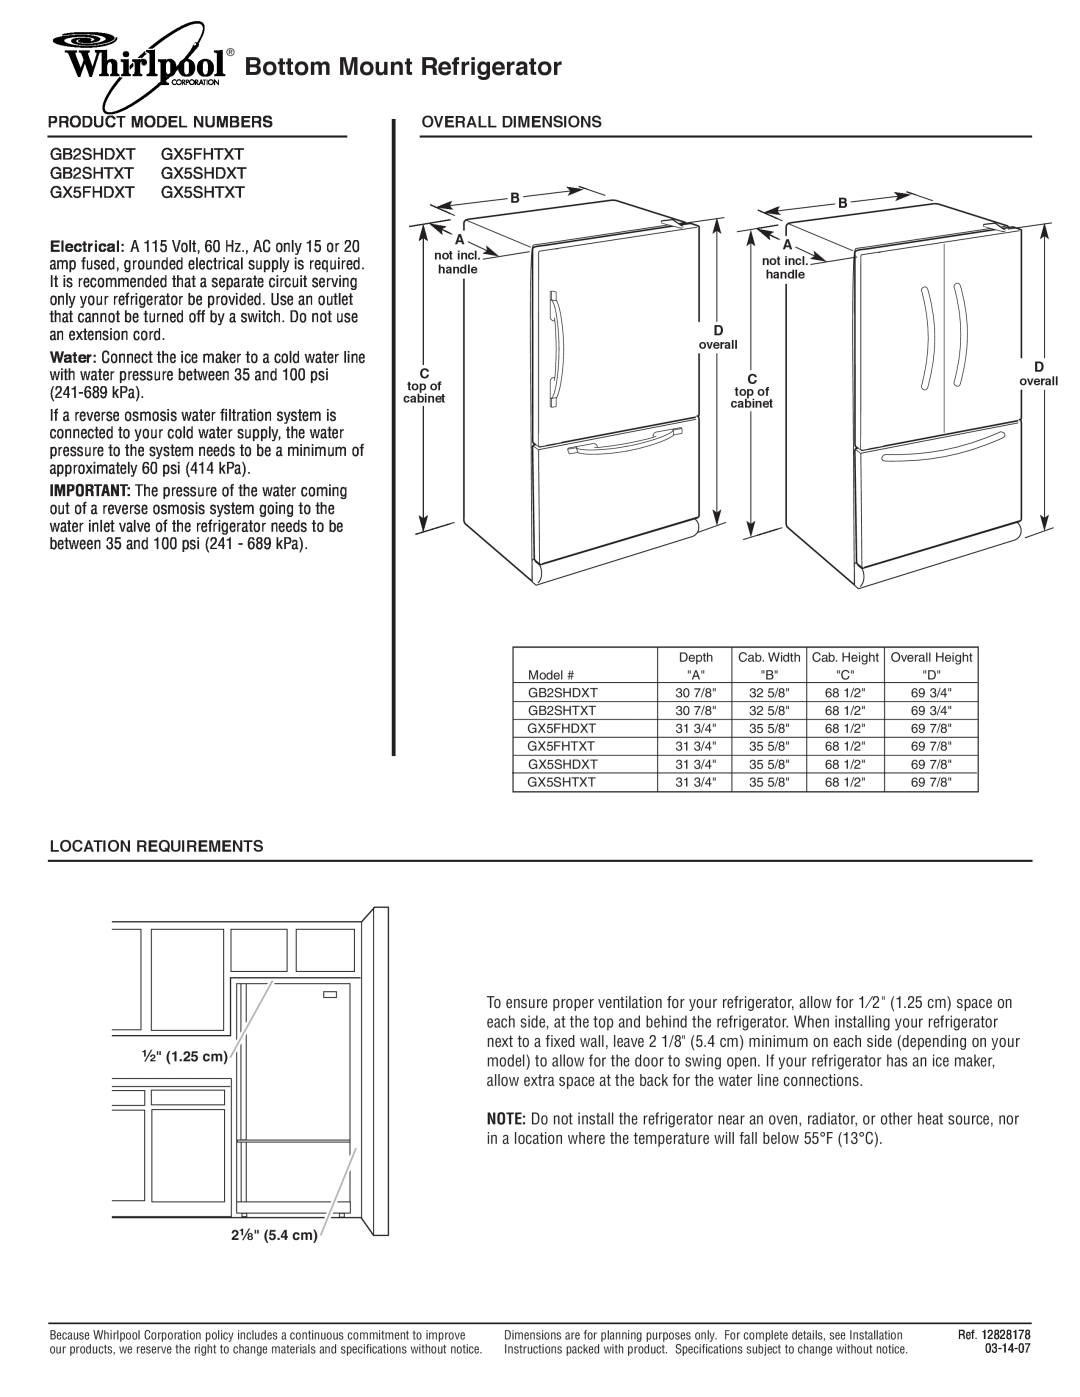 Whirlpool GX5FHDXT dimensions Bottom Mount Refrigerator, Product Model Numbers, Overall Dimensions, Location Requirements 